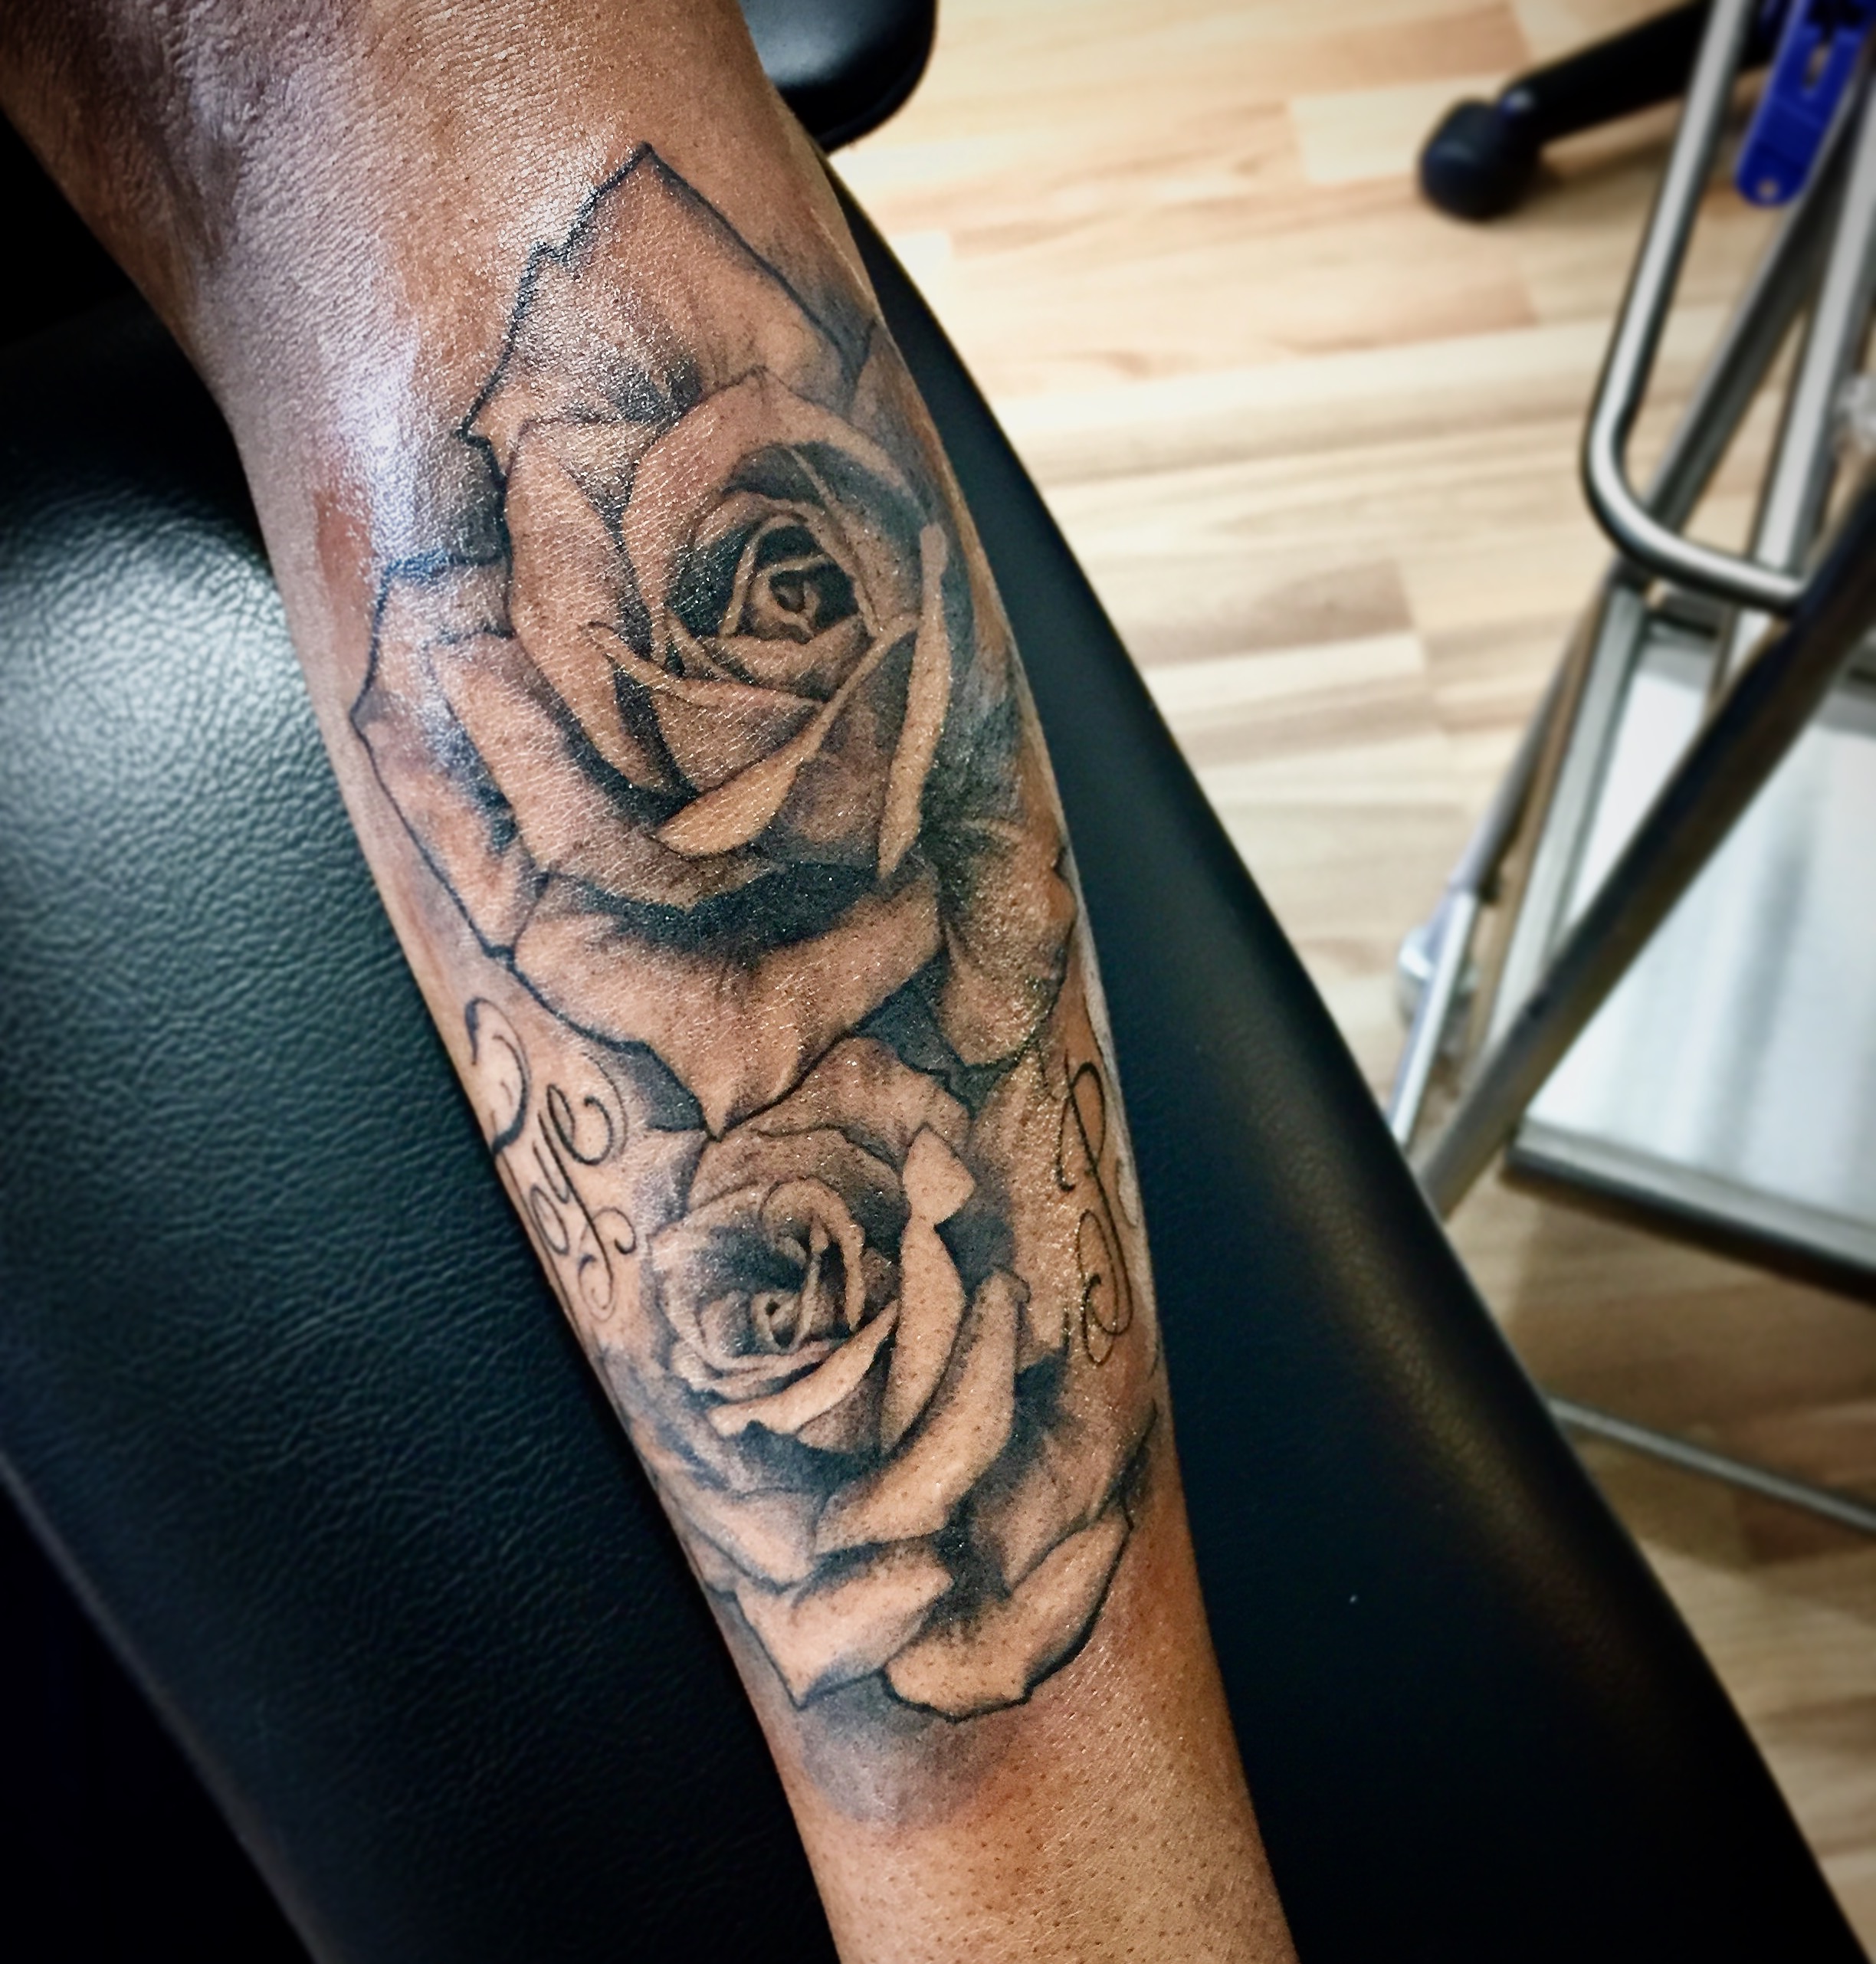 Awesome Black And Gray Flowers Tattoo  Get an InkGet an Ink